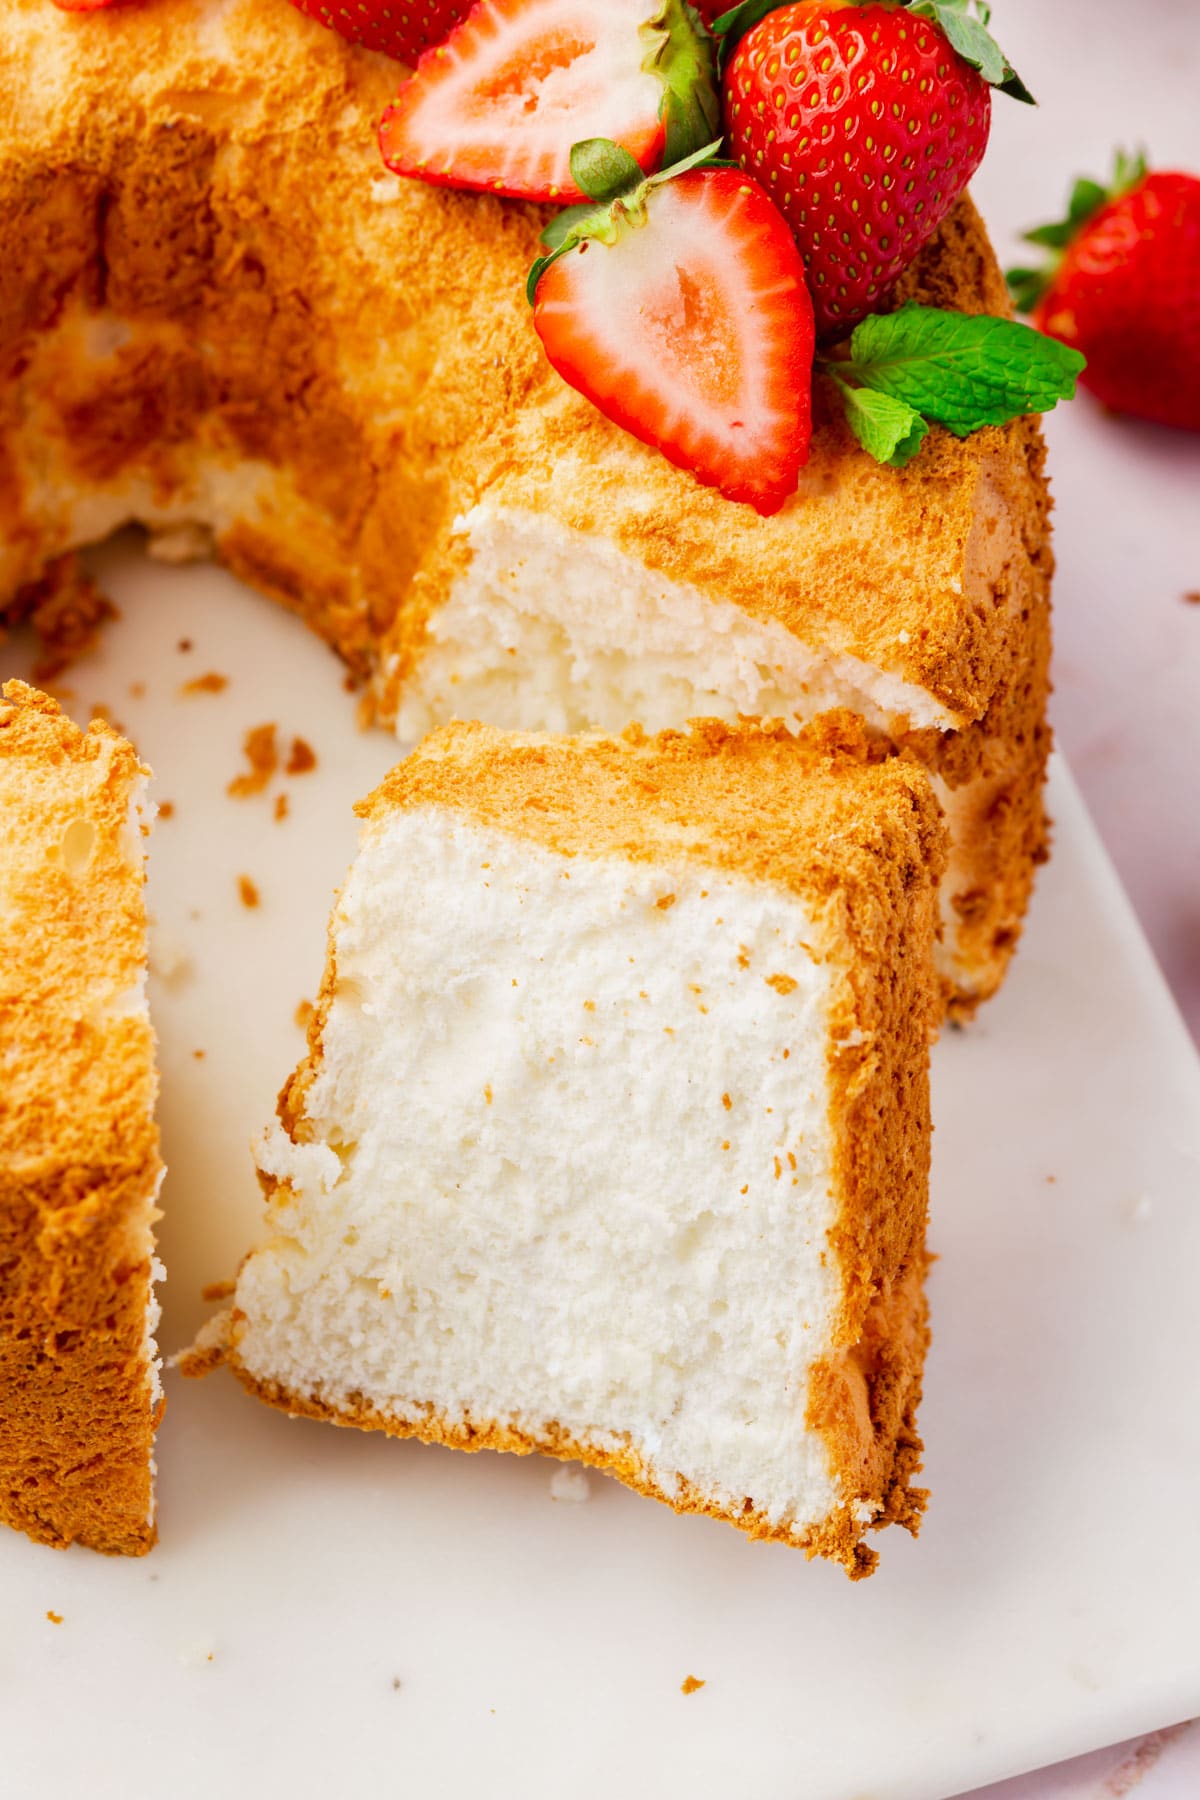 Close up of an angel food cake topped with fresh strawberries and mint leaves, with a piece sliced exposing the light airy center.  